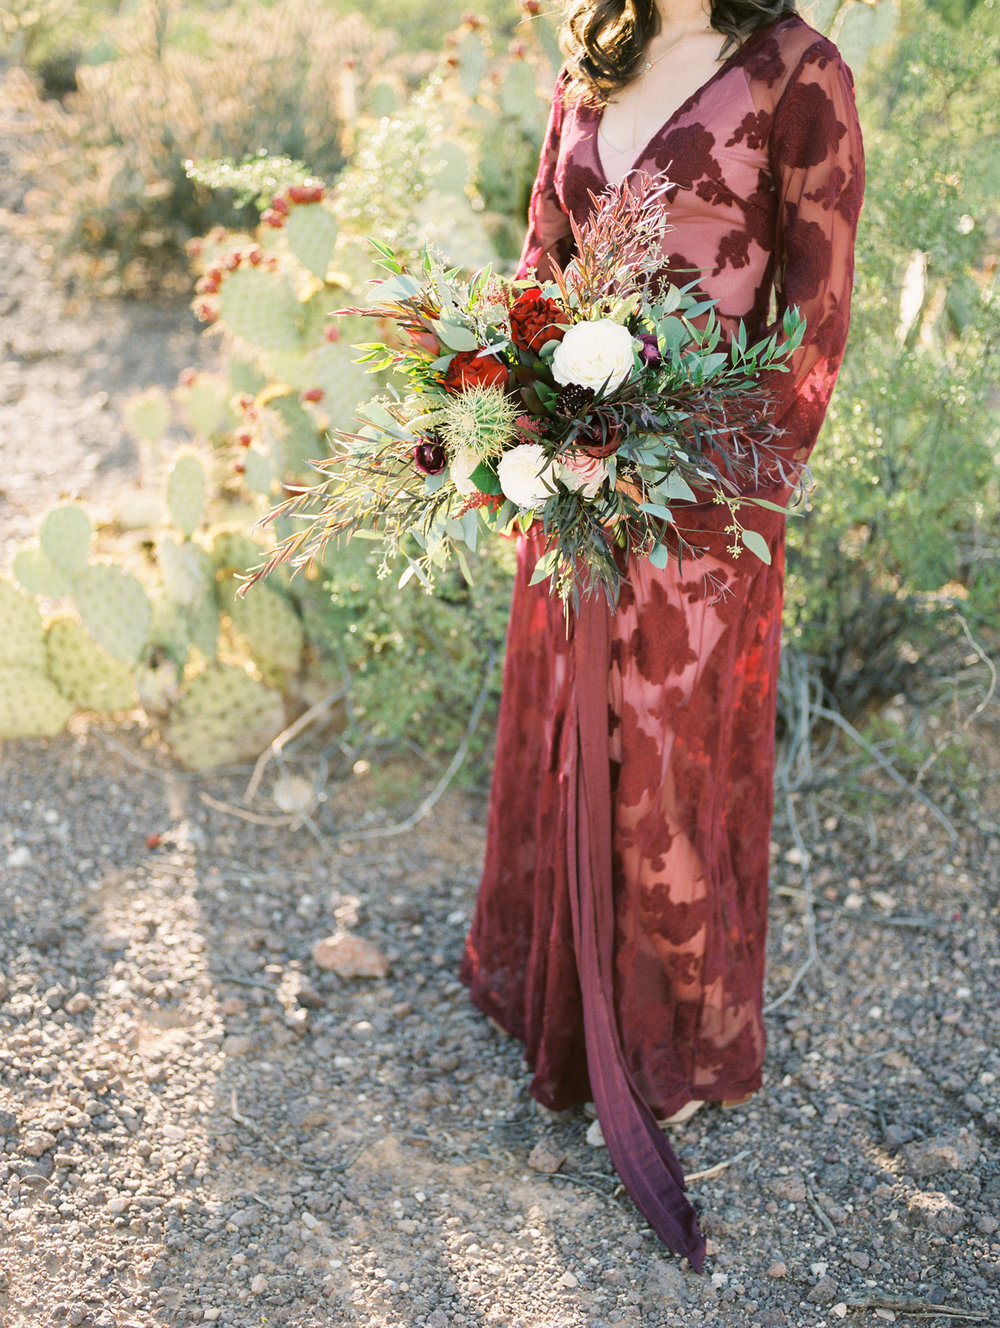  Stunning burgundy lace wedding dress paired with a fall desert bridal bouquet with cactus&nbsp; 